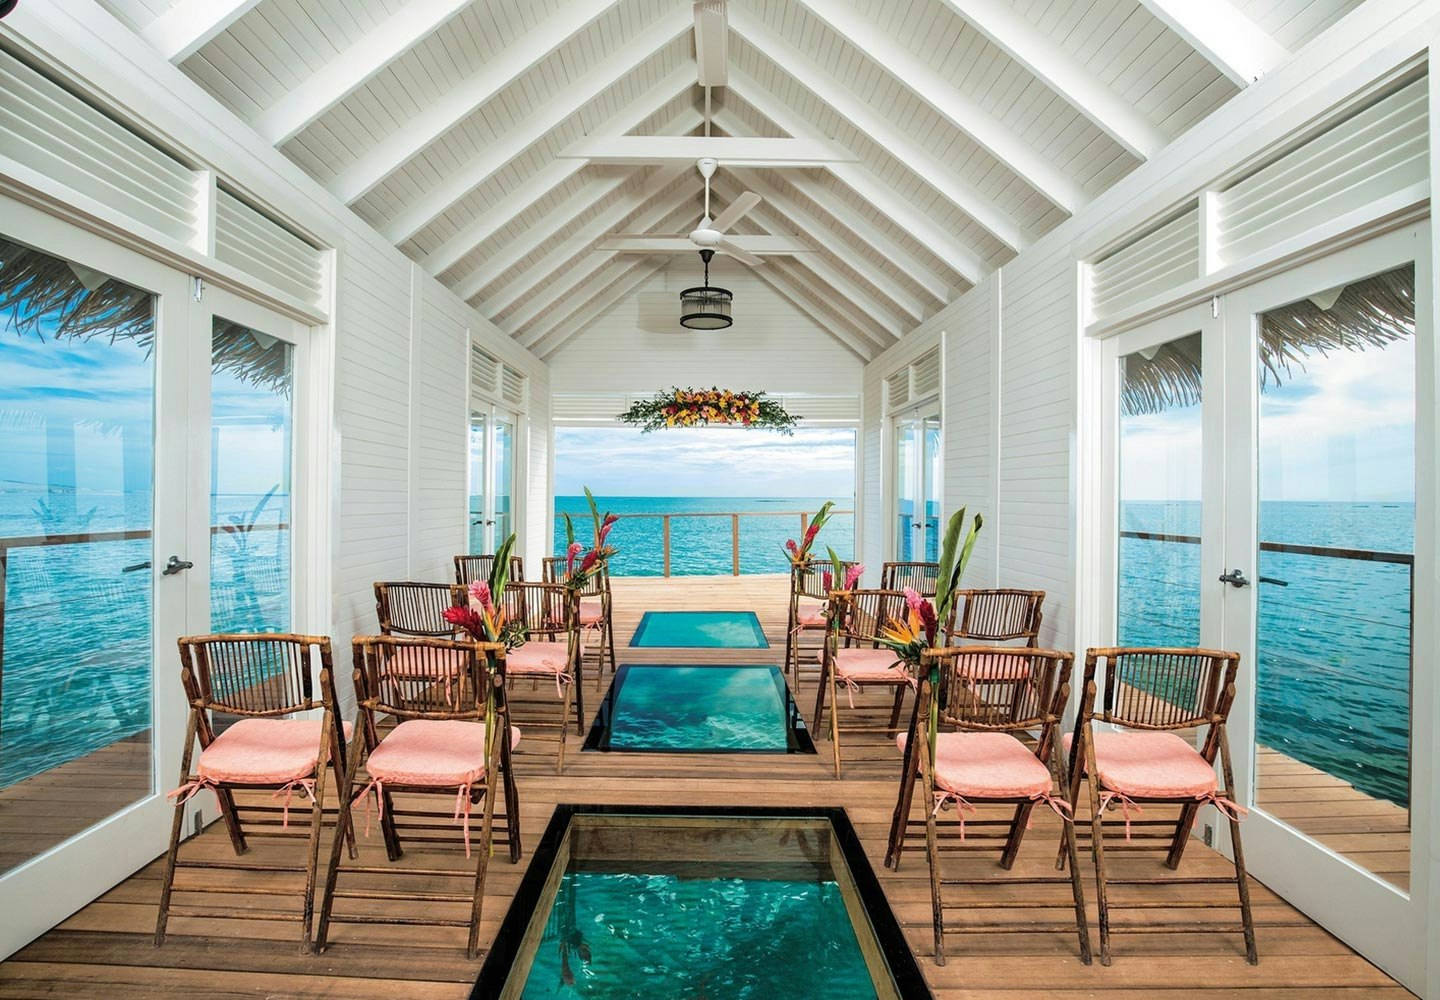 The Over-the-Water Wedding Chapel with glass floors.